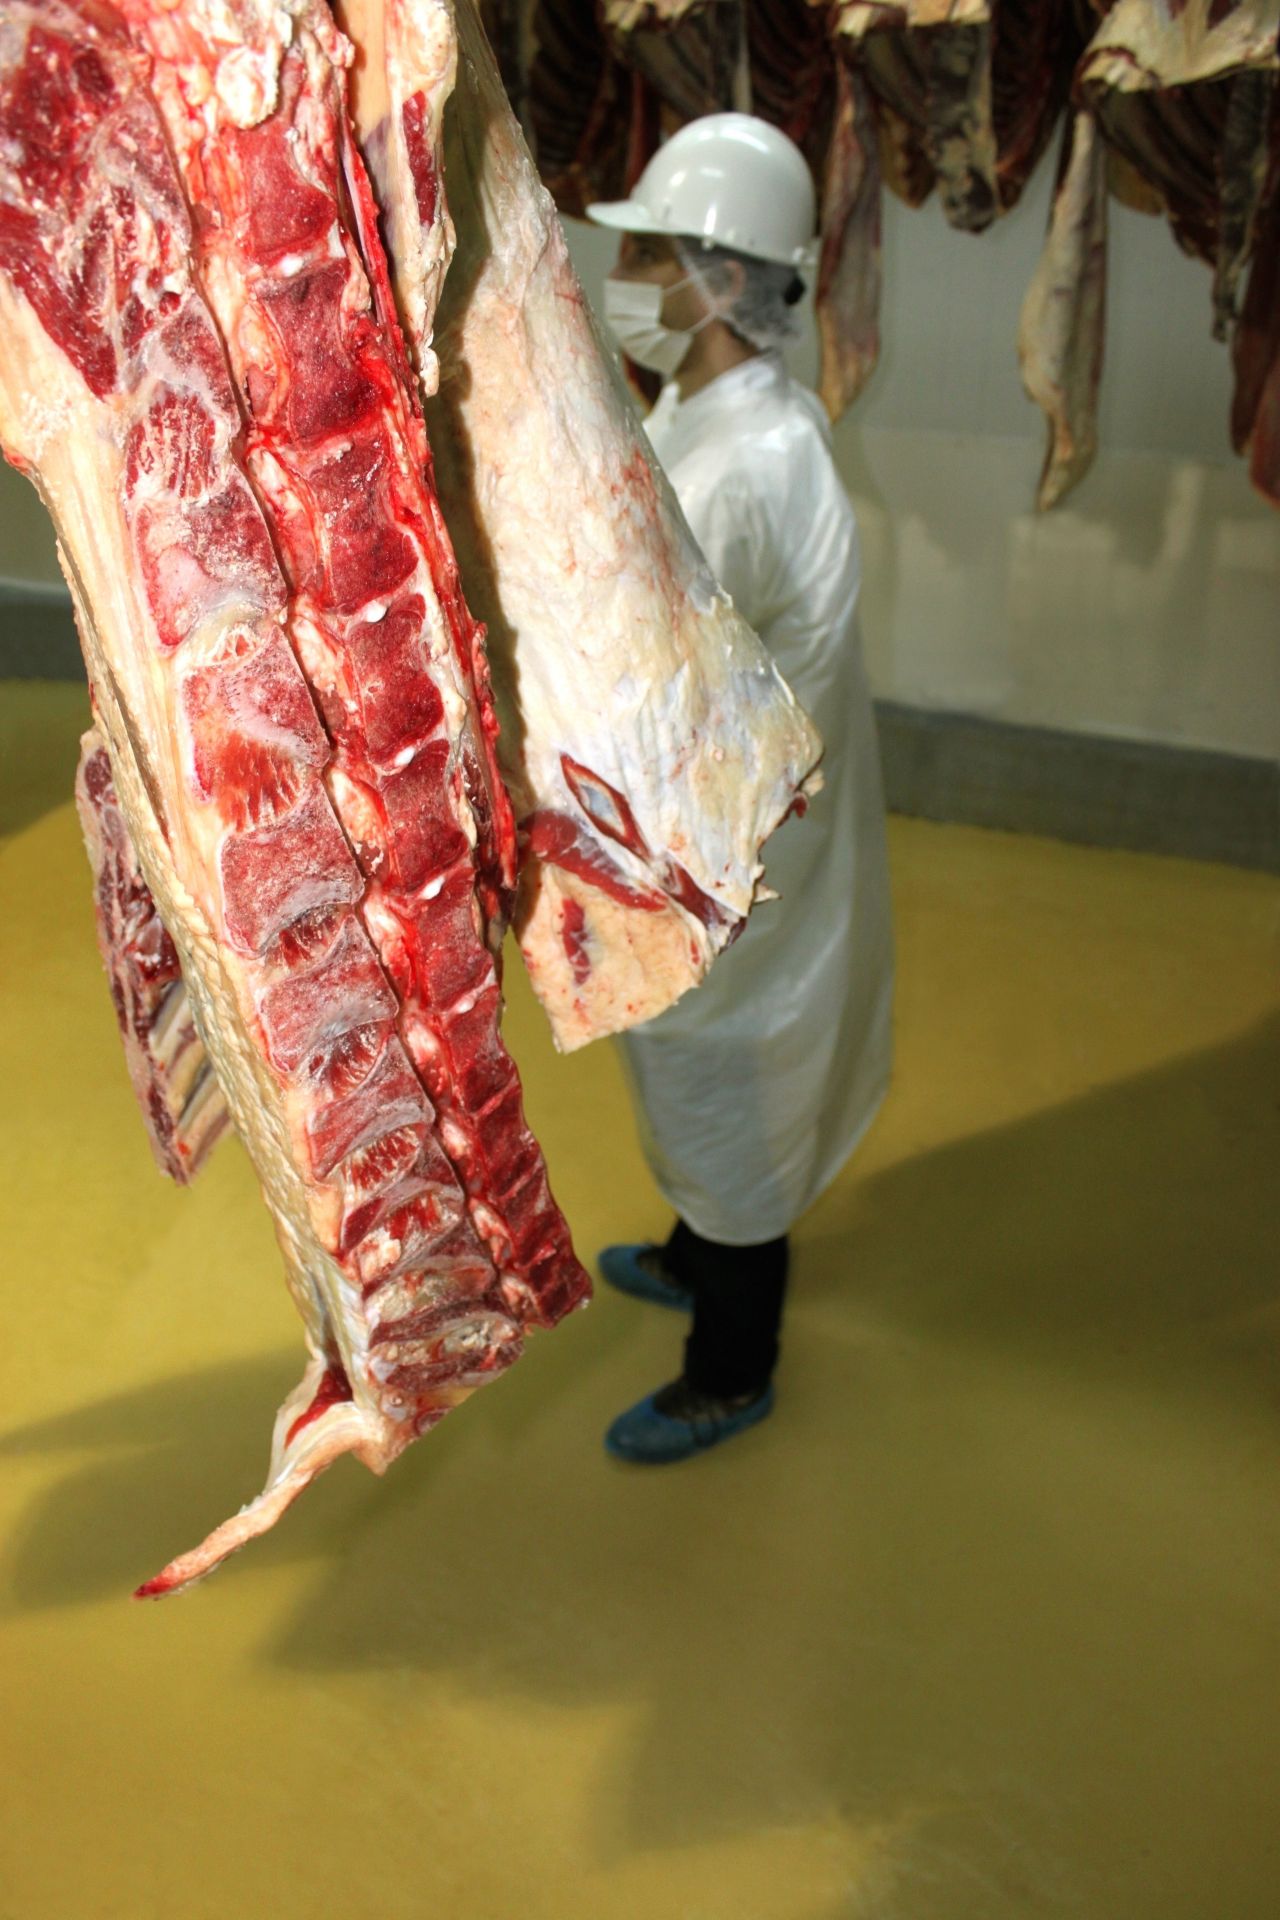 Worker standing on hygenic floor in Meat Processing Plant